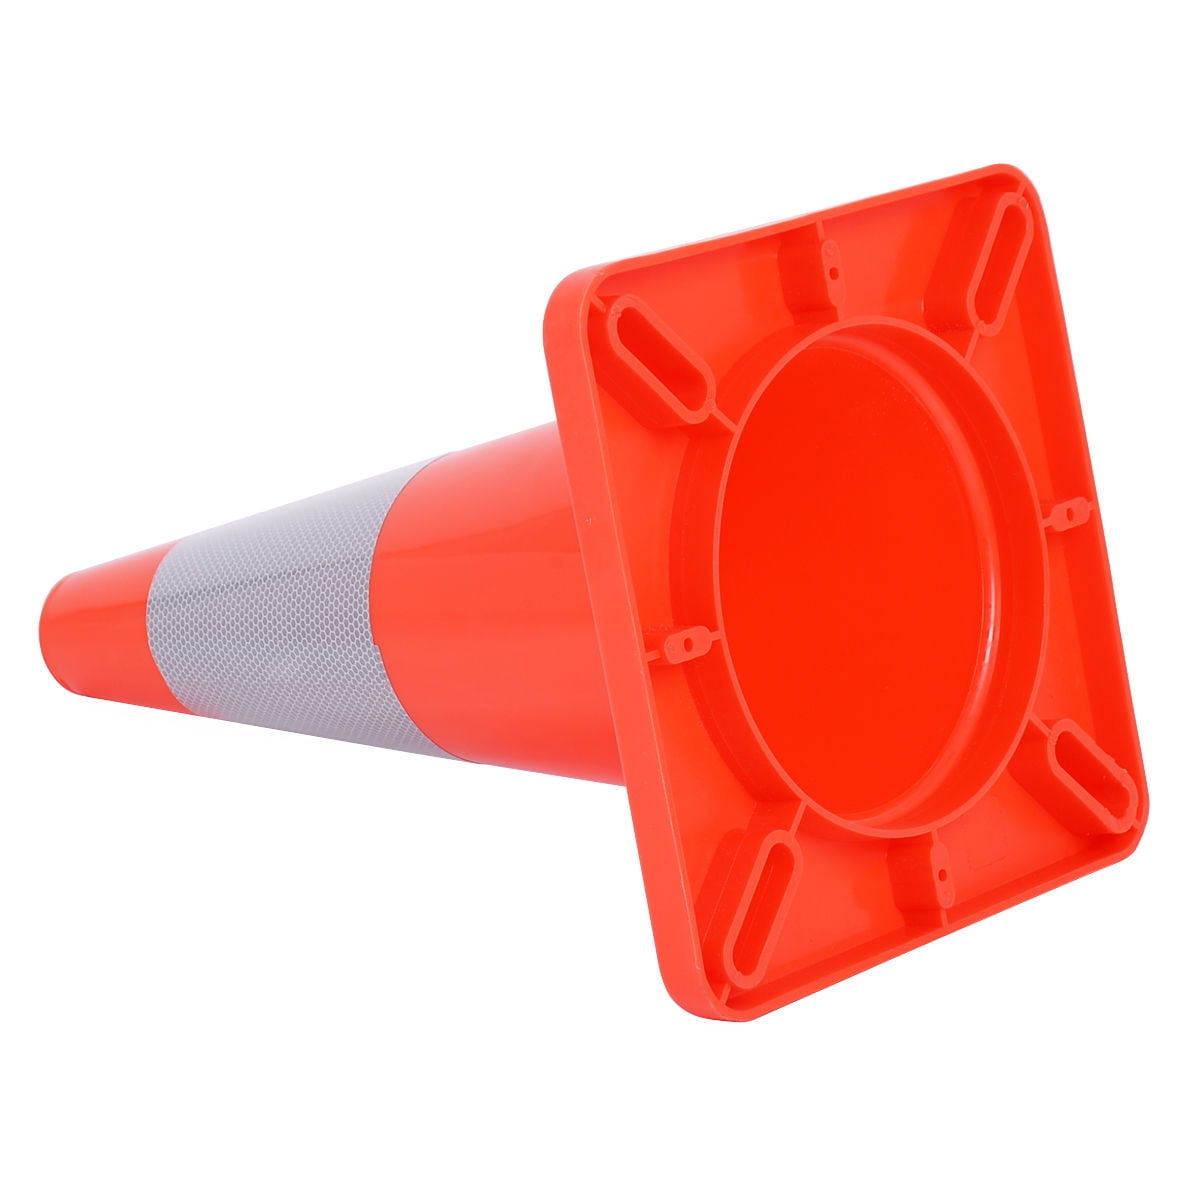 5PCS Traffic Cones 18" Slim Fluorescent Reflective Road Safety Parking Cones New 